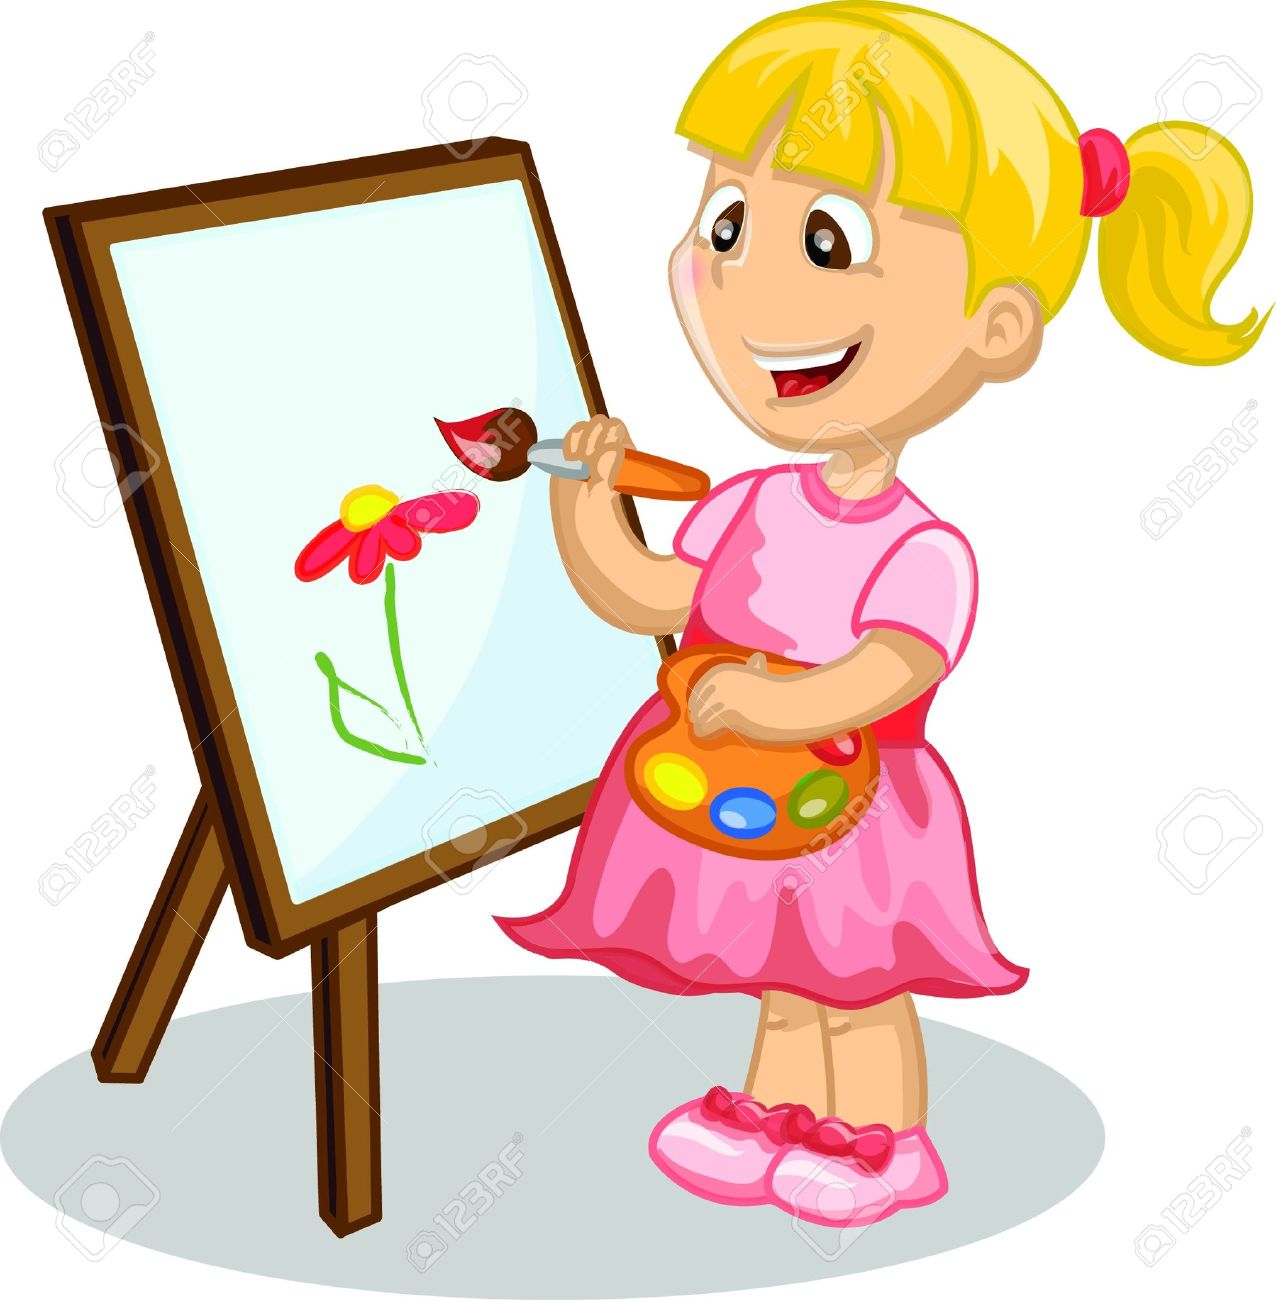 Painter clipart student, Painter student Transparent FREE for download ...